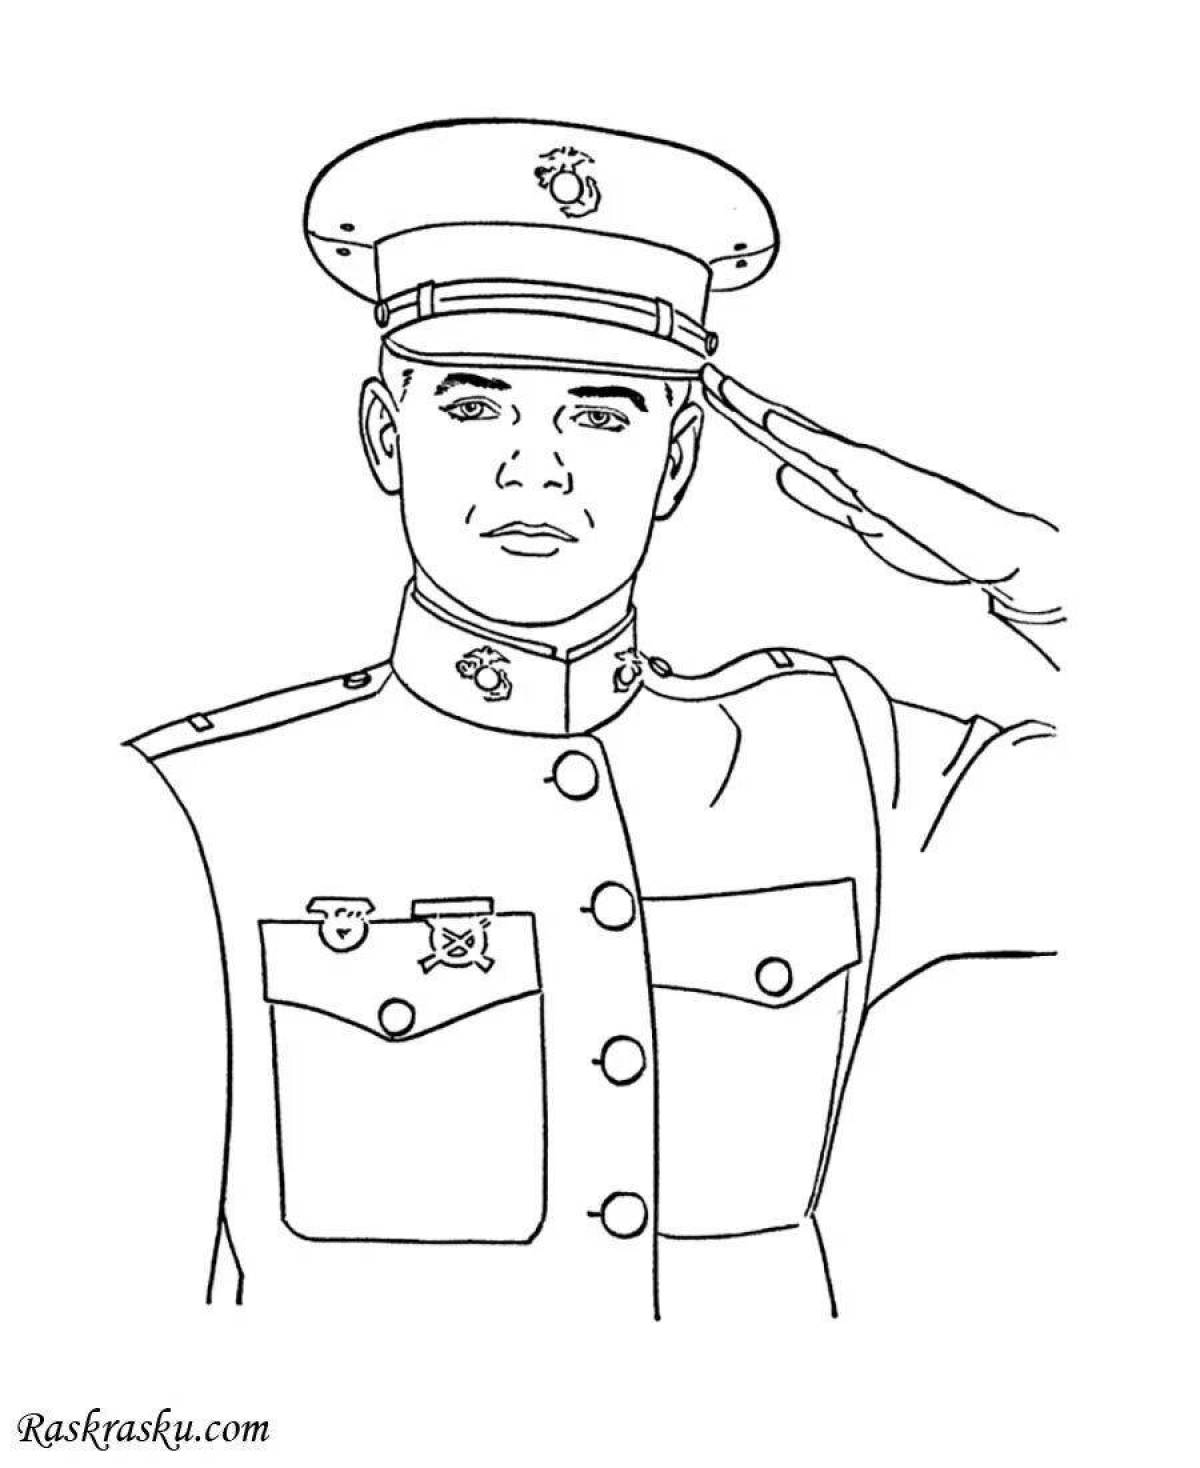 Coloring book bold military portrait